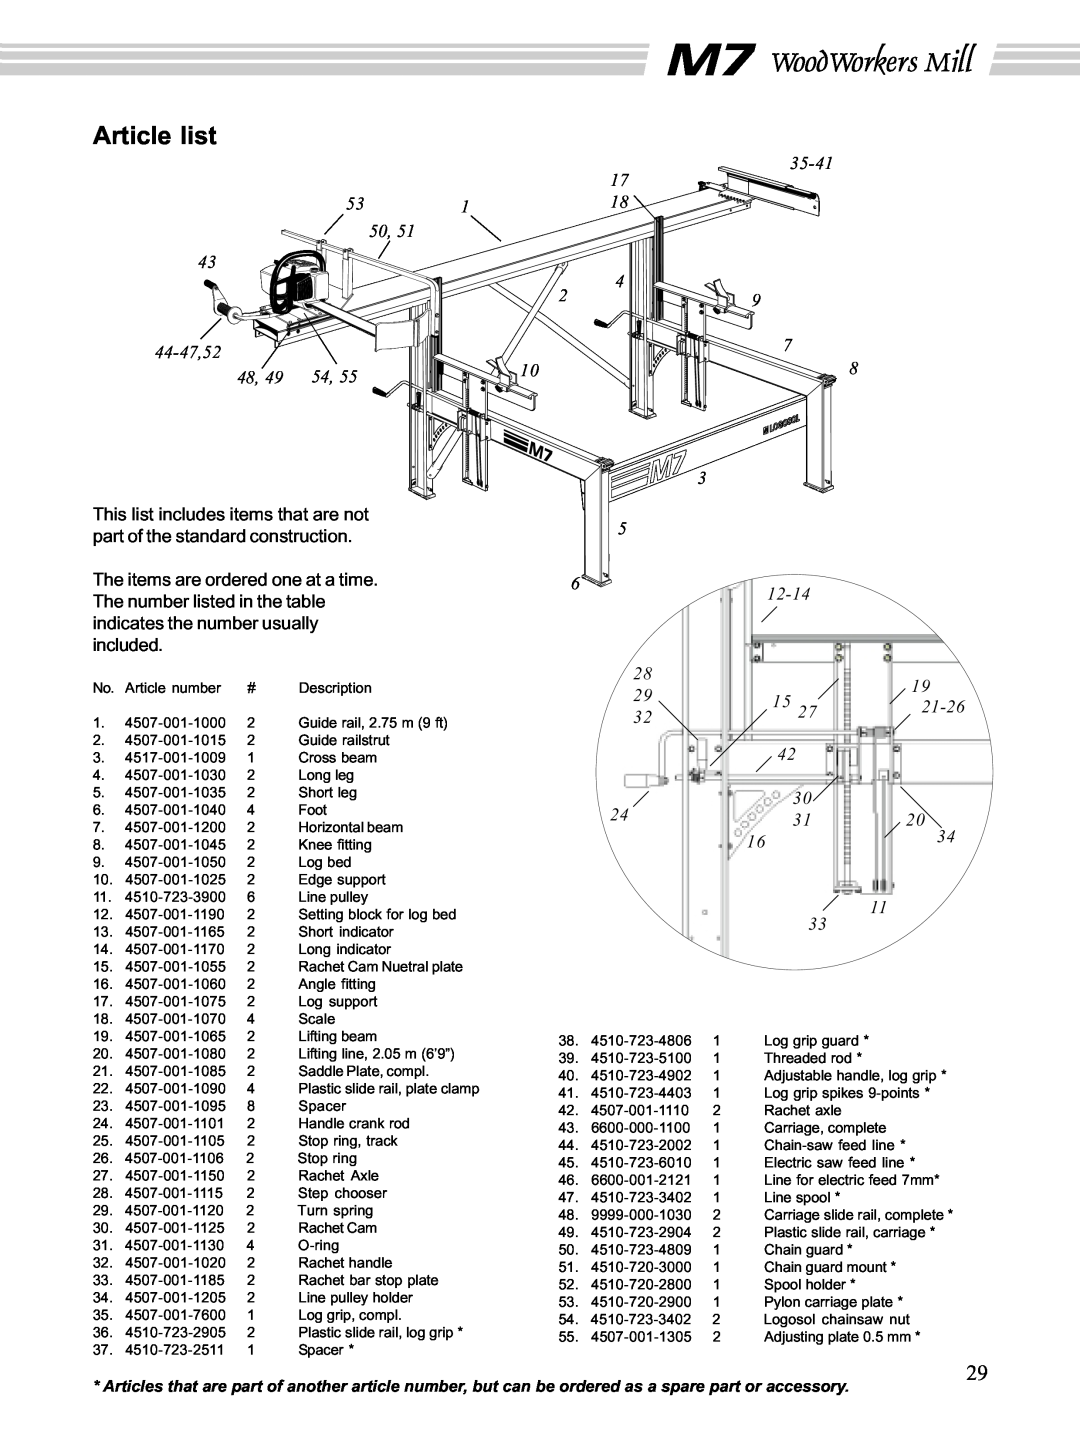 Husqvarna M7 manual Article list, 35-41, 44-47,52, This list includes items that are not, part of the standard construction 